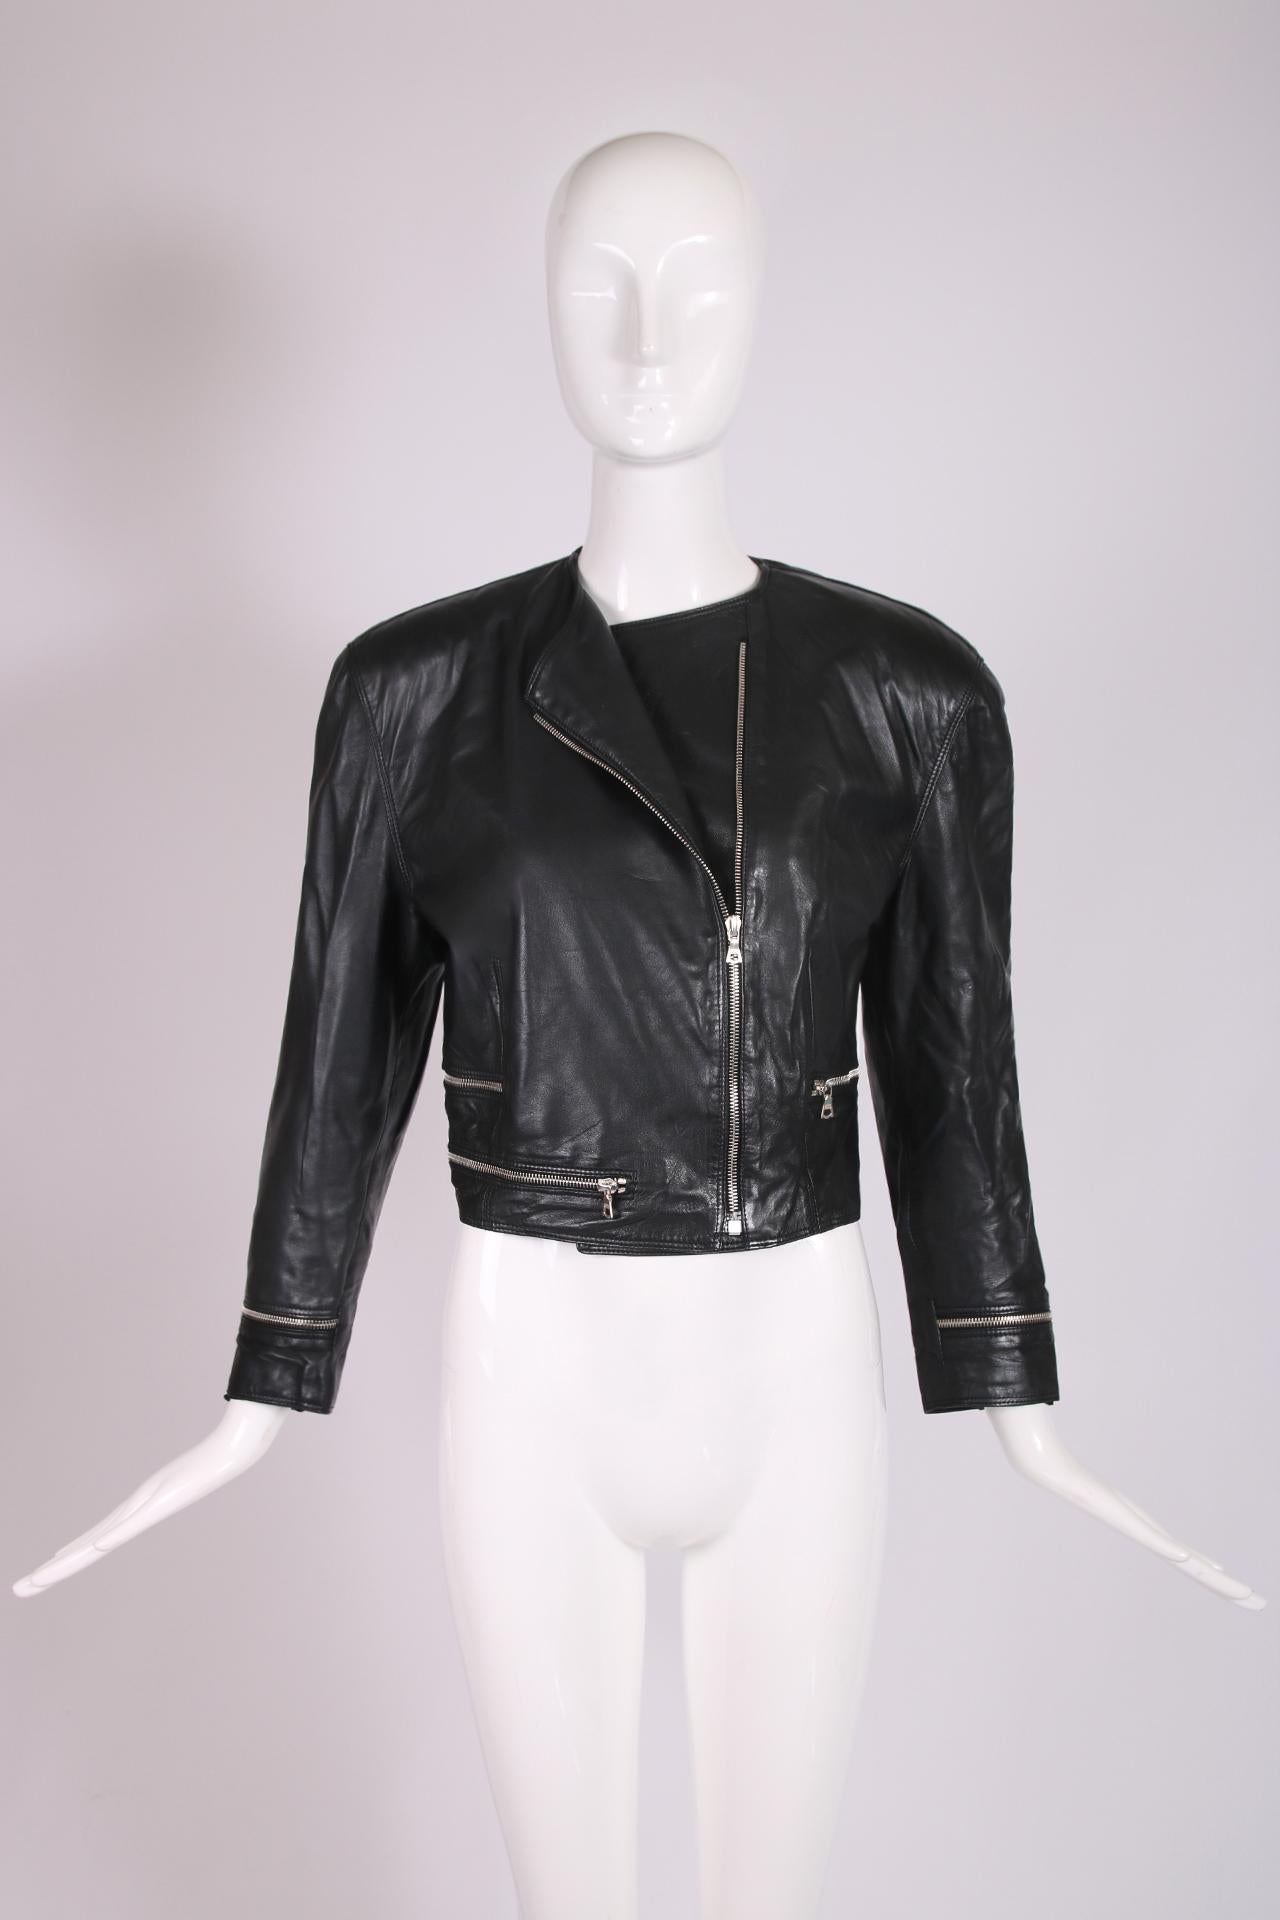 Early 1990's Versace cropped black leather motorcycle jacket with a decorative zipper design motif at the cuffs and waist. The leather is incredibly soft and supple. There is no size tag but the interior is lined. In excellent condition - please